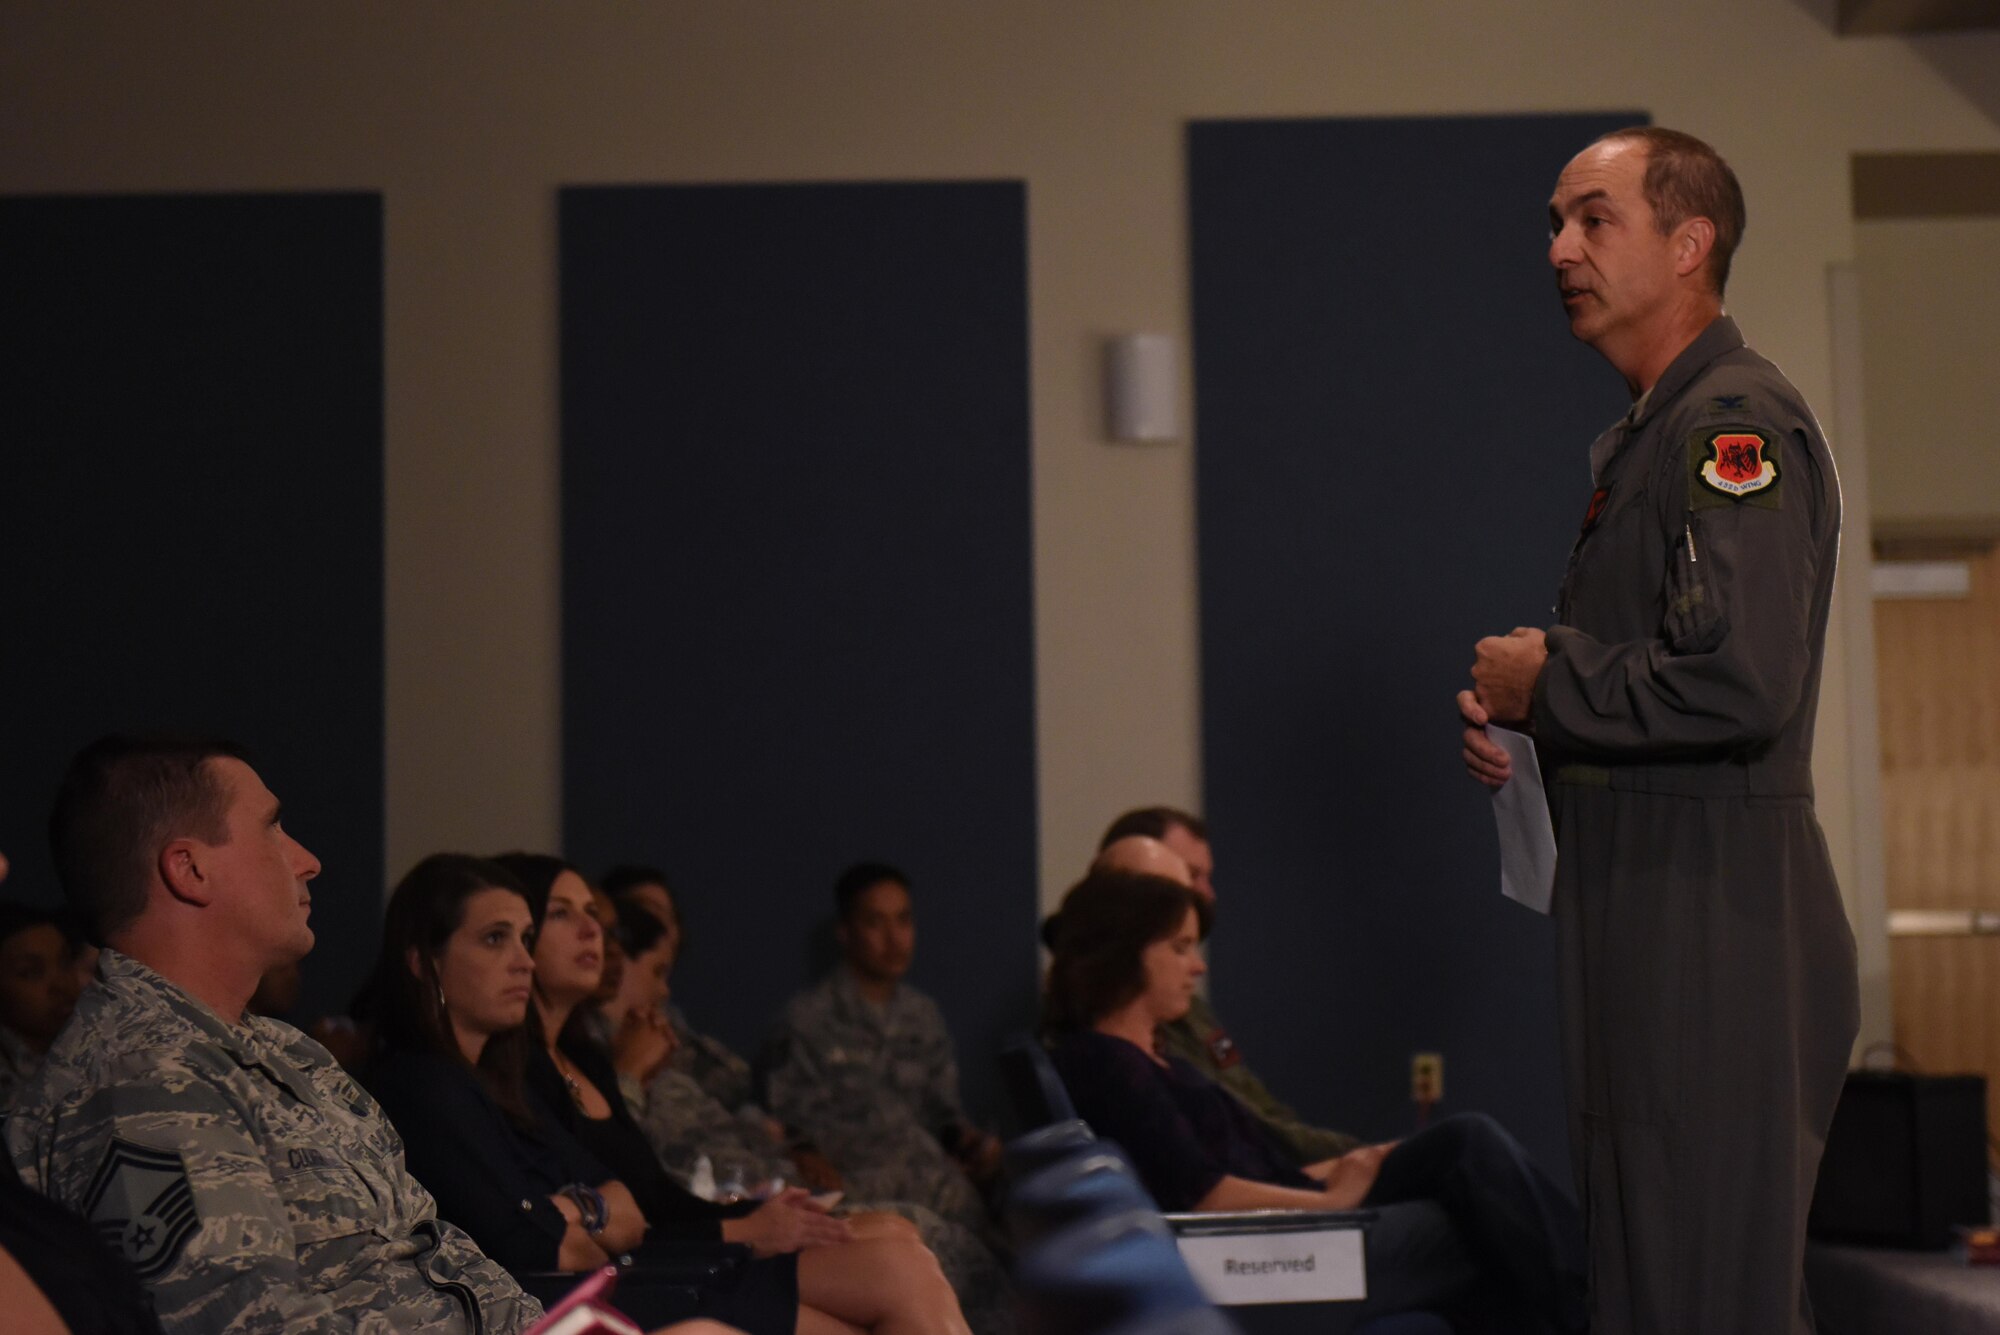 Col. David Bissonnette, 432nd Wing/432nd Air Expeditionary Wing vice commander, addressed the members who attended Storytellers and gave closing remarks in the Creech auditorium, October 18, 2017. Bissonnette expressed that he, as well as many in the audience, could relate to what some of the speakers experienced and thanked everyone who participated in this event. (U.S. Air Force photo/Airman 1st Class Haley Stevens)